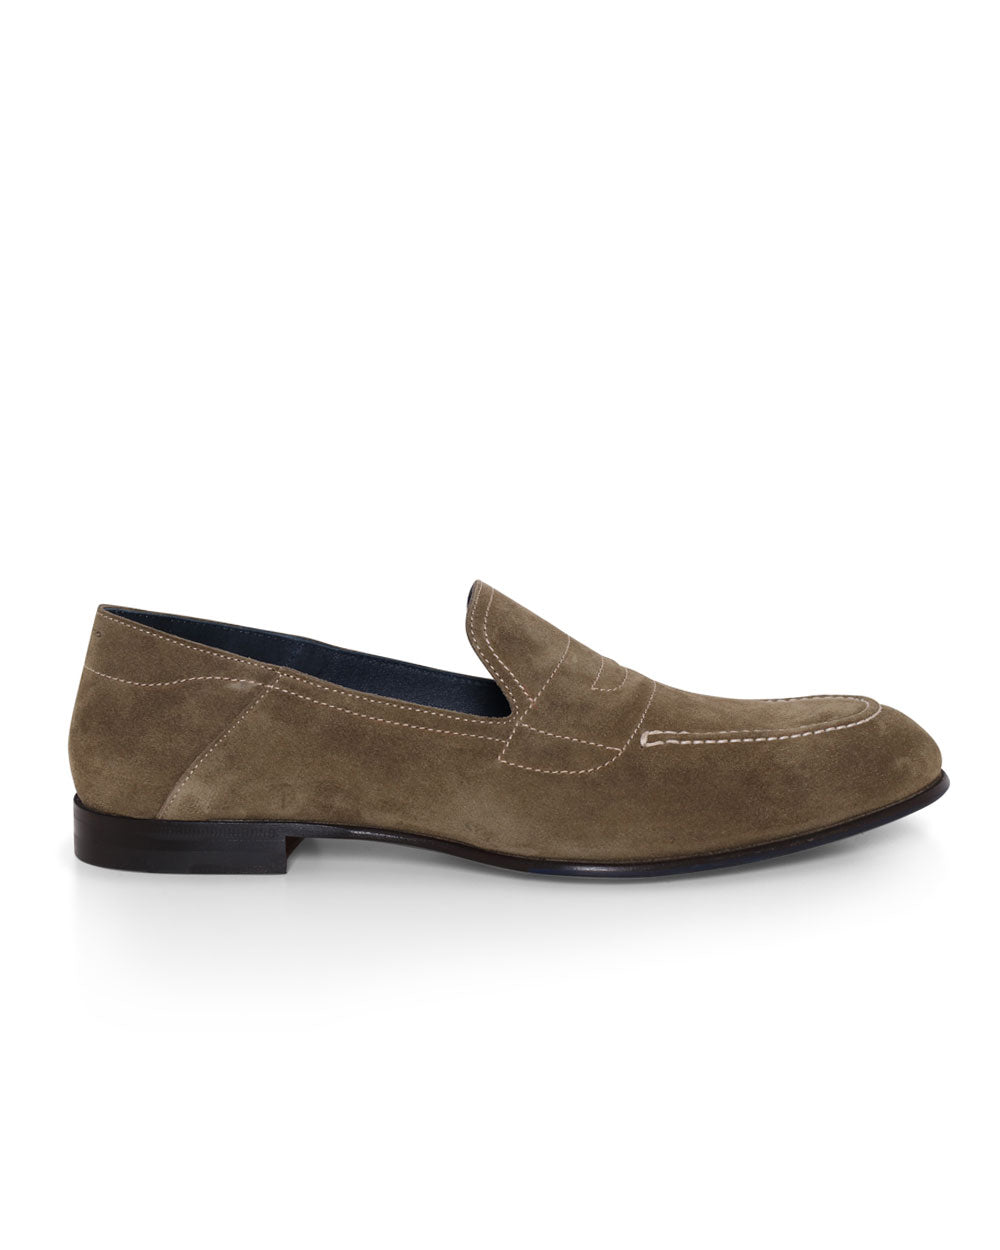 Nerano Suede Loafer in Quercia